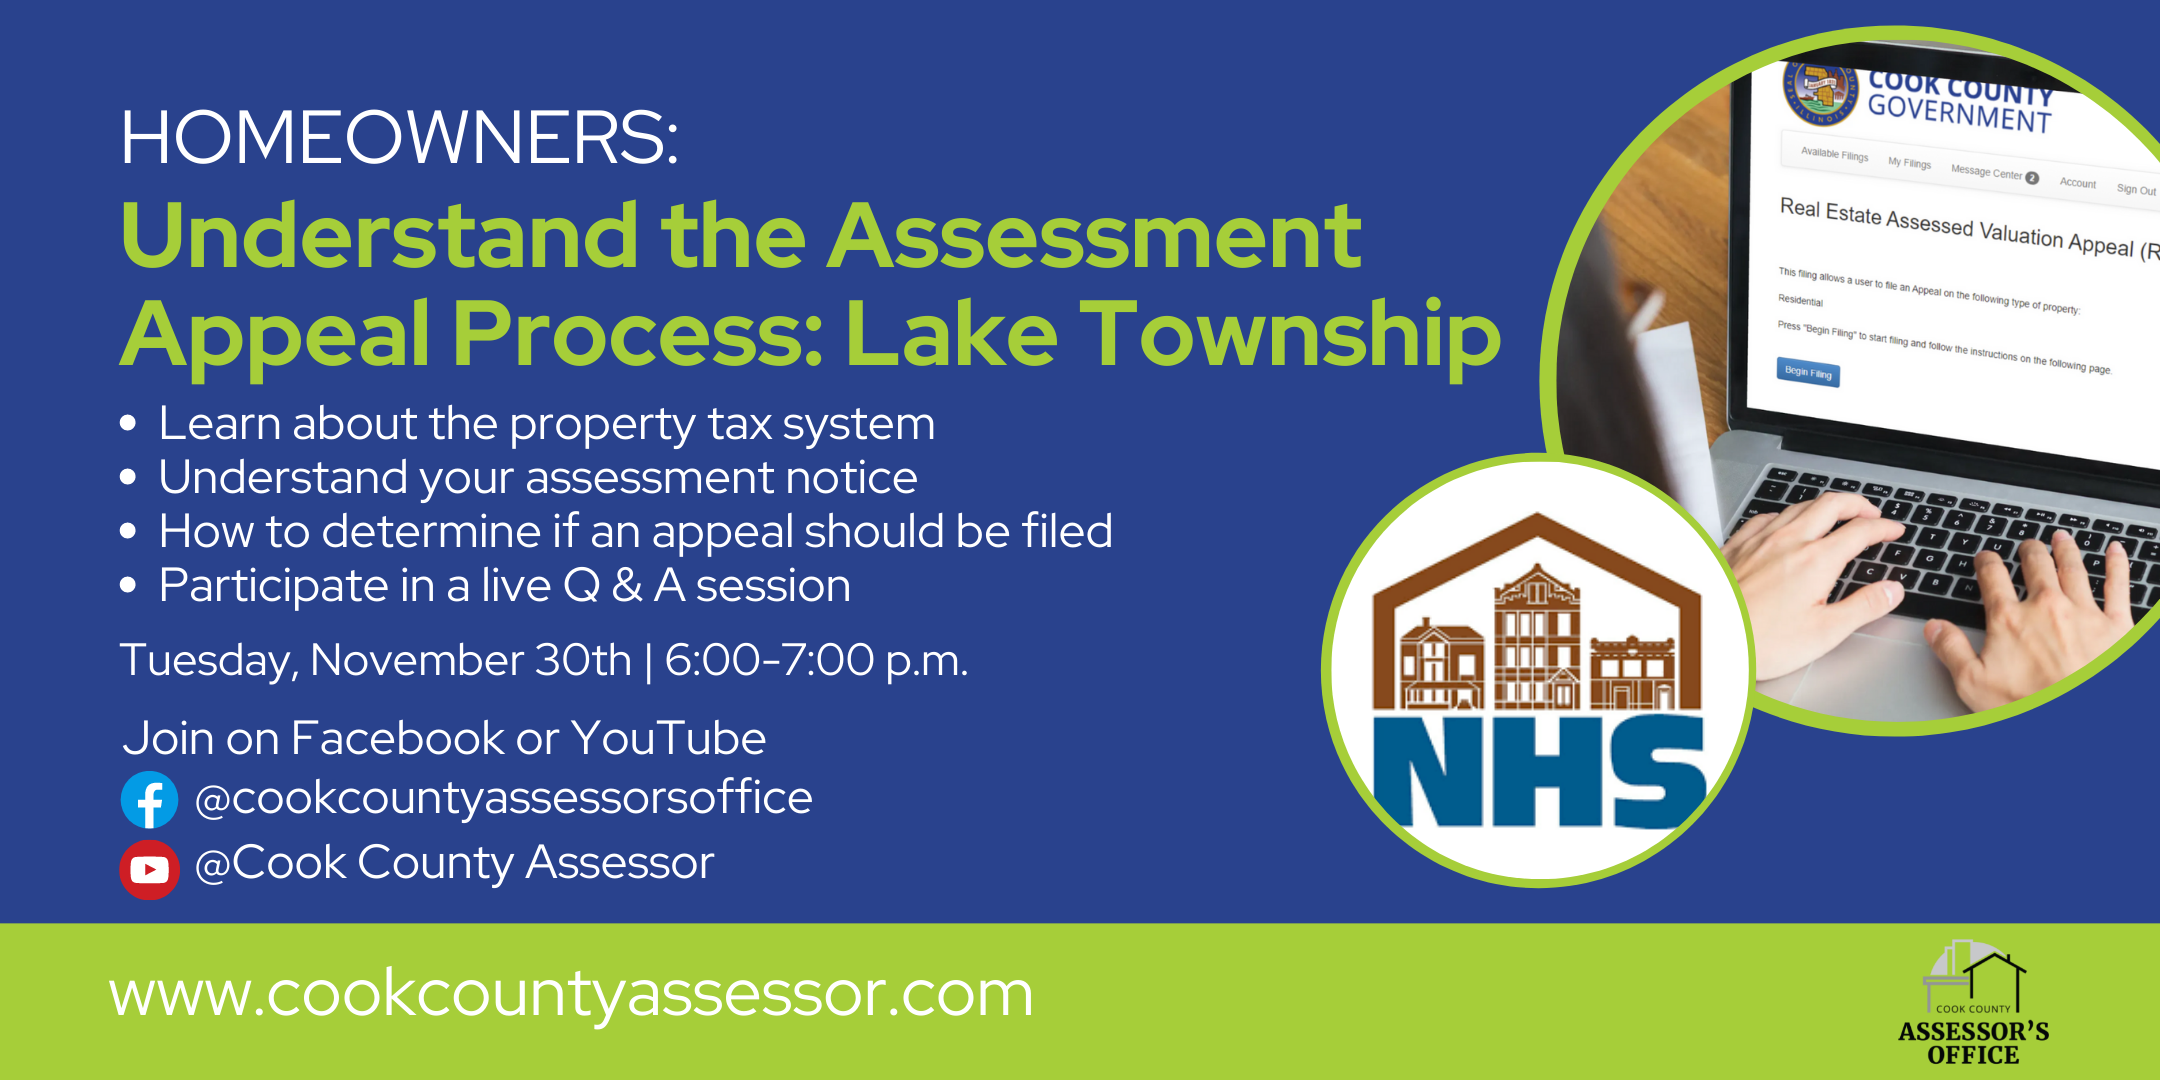 Invite to Assessment Appeal Process Workshop for Lake Township. November 30, 2021